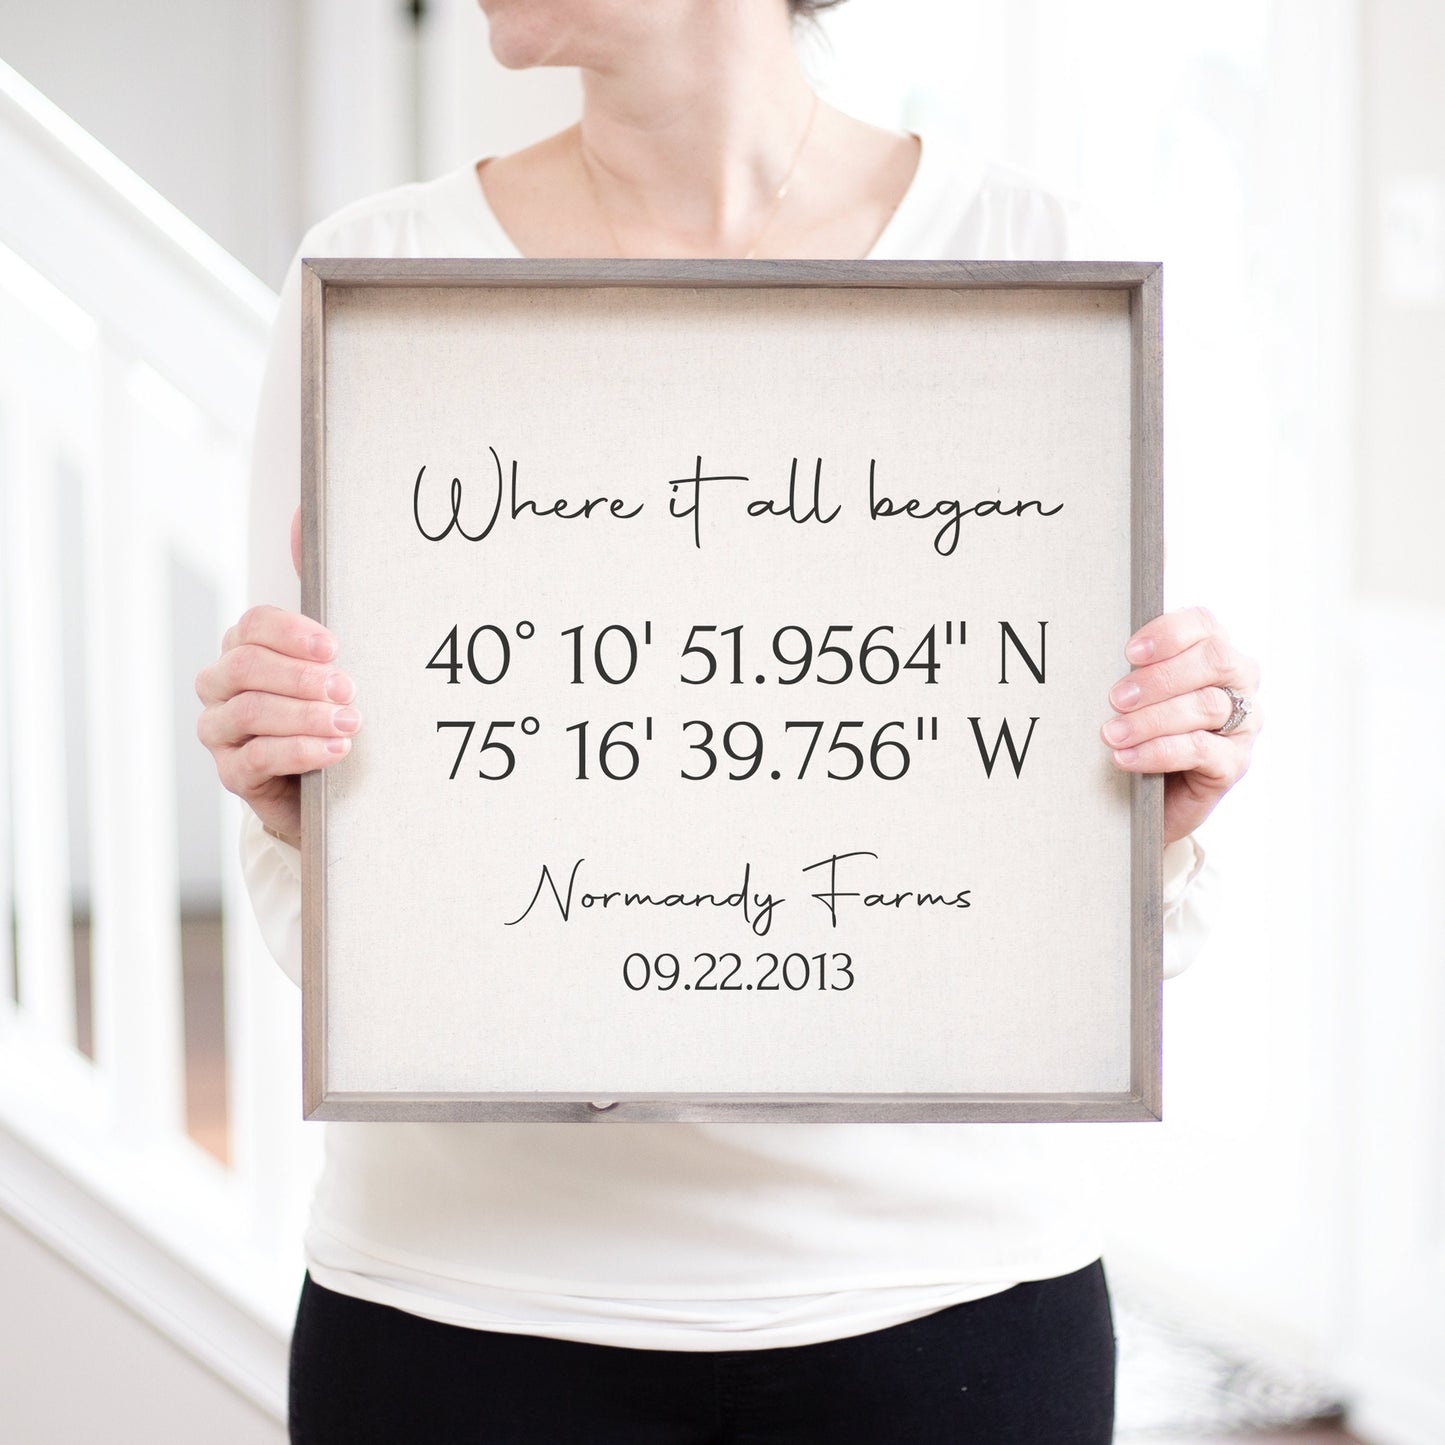 Load image into Gallery viewer, Where It All Began Latitude and Longitude Framed Linen Print | Personalized Wedding Gift | GPS Coordinates | Housewarming Gift for Couple
